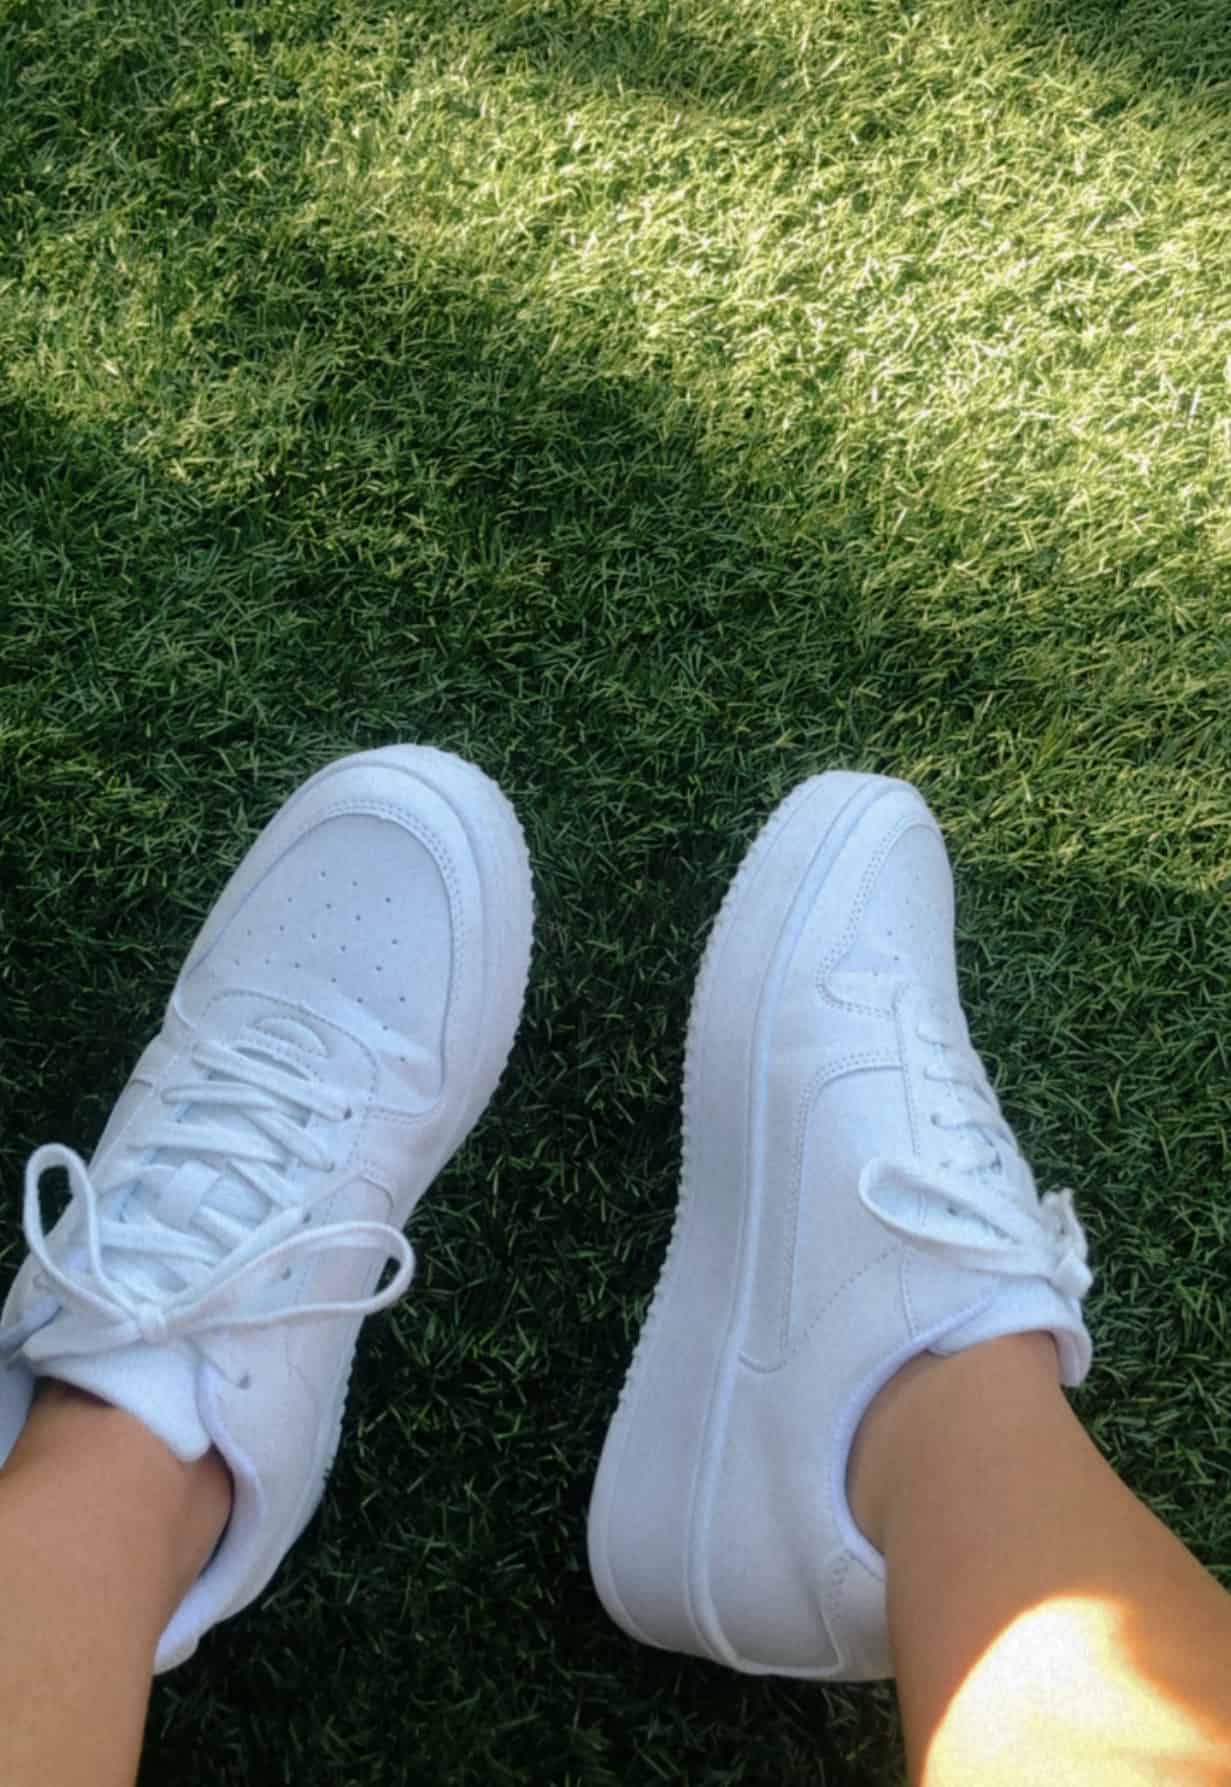 airforce 1s near me